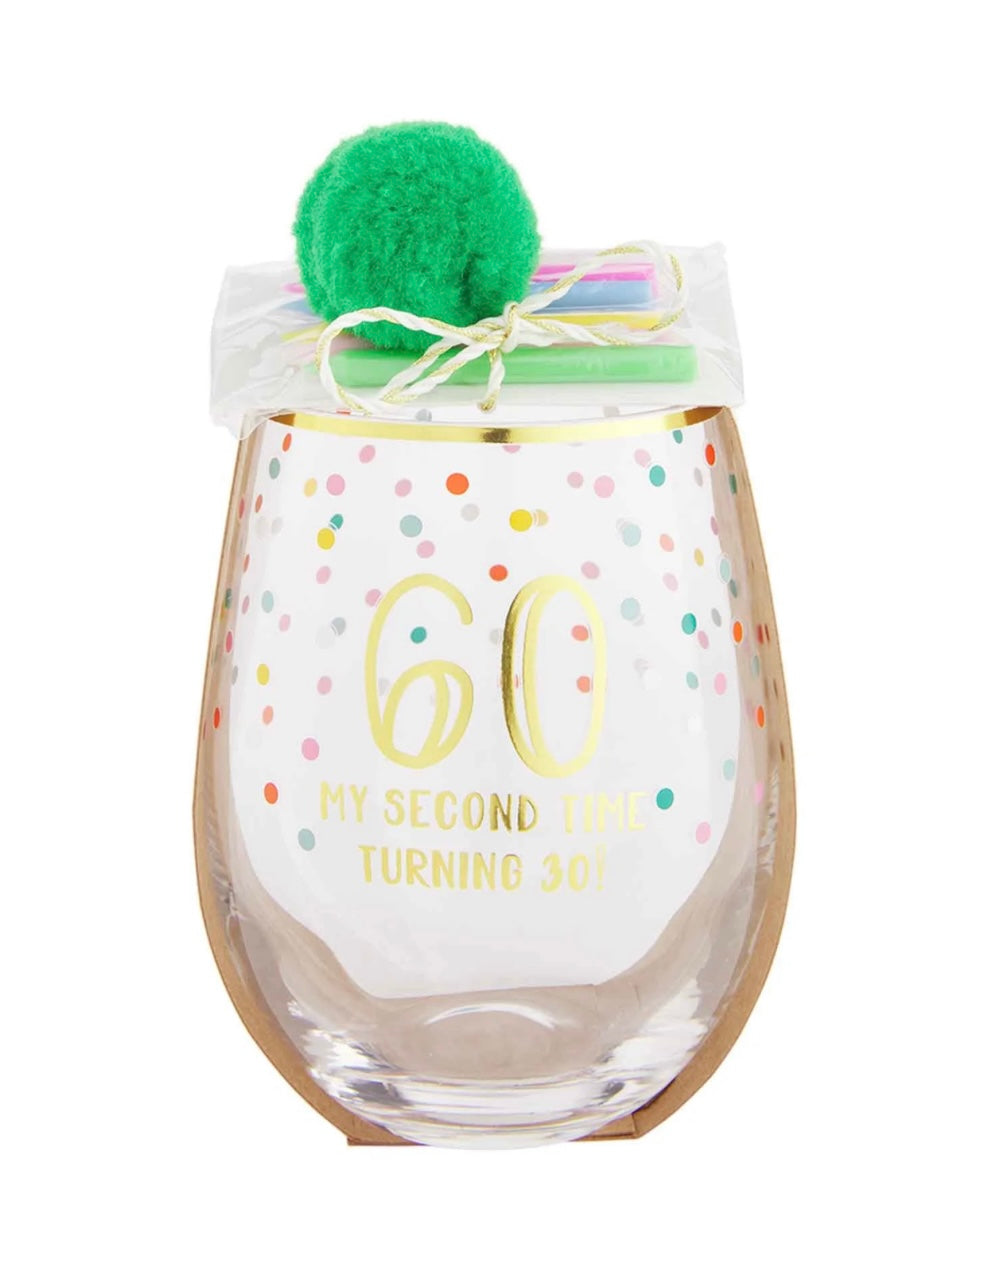 Green stemless wine glasses with confetti details that says " 60, my second time turning 30".